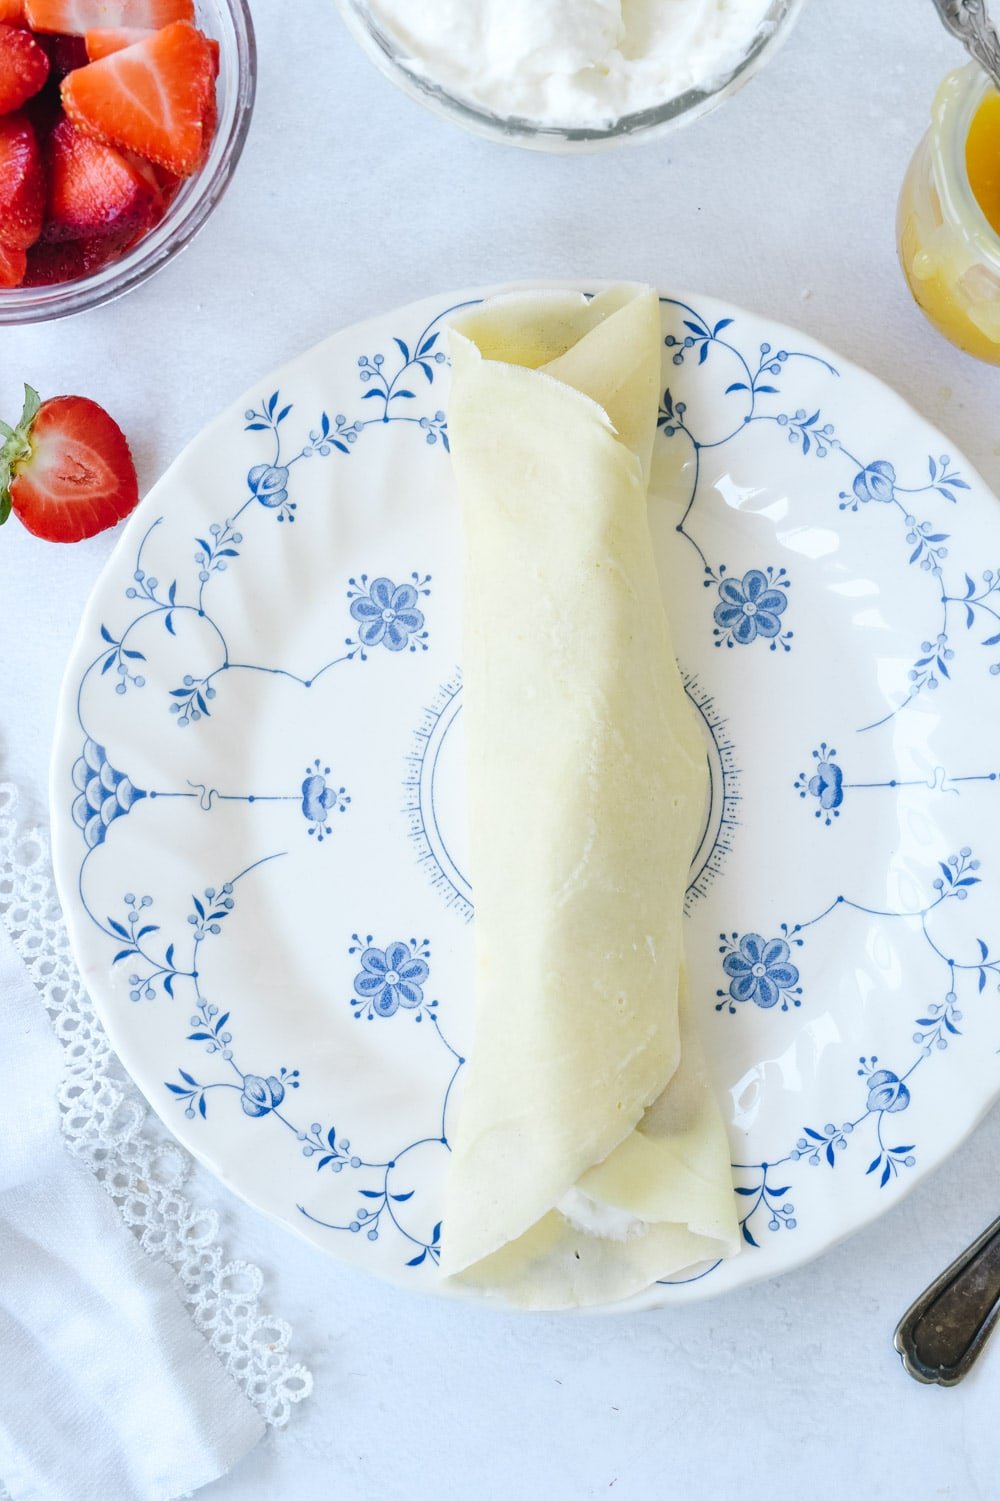 Rolled Crepe